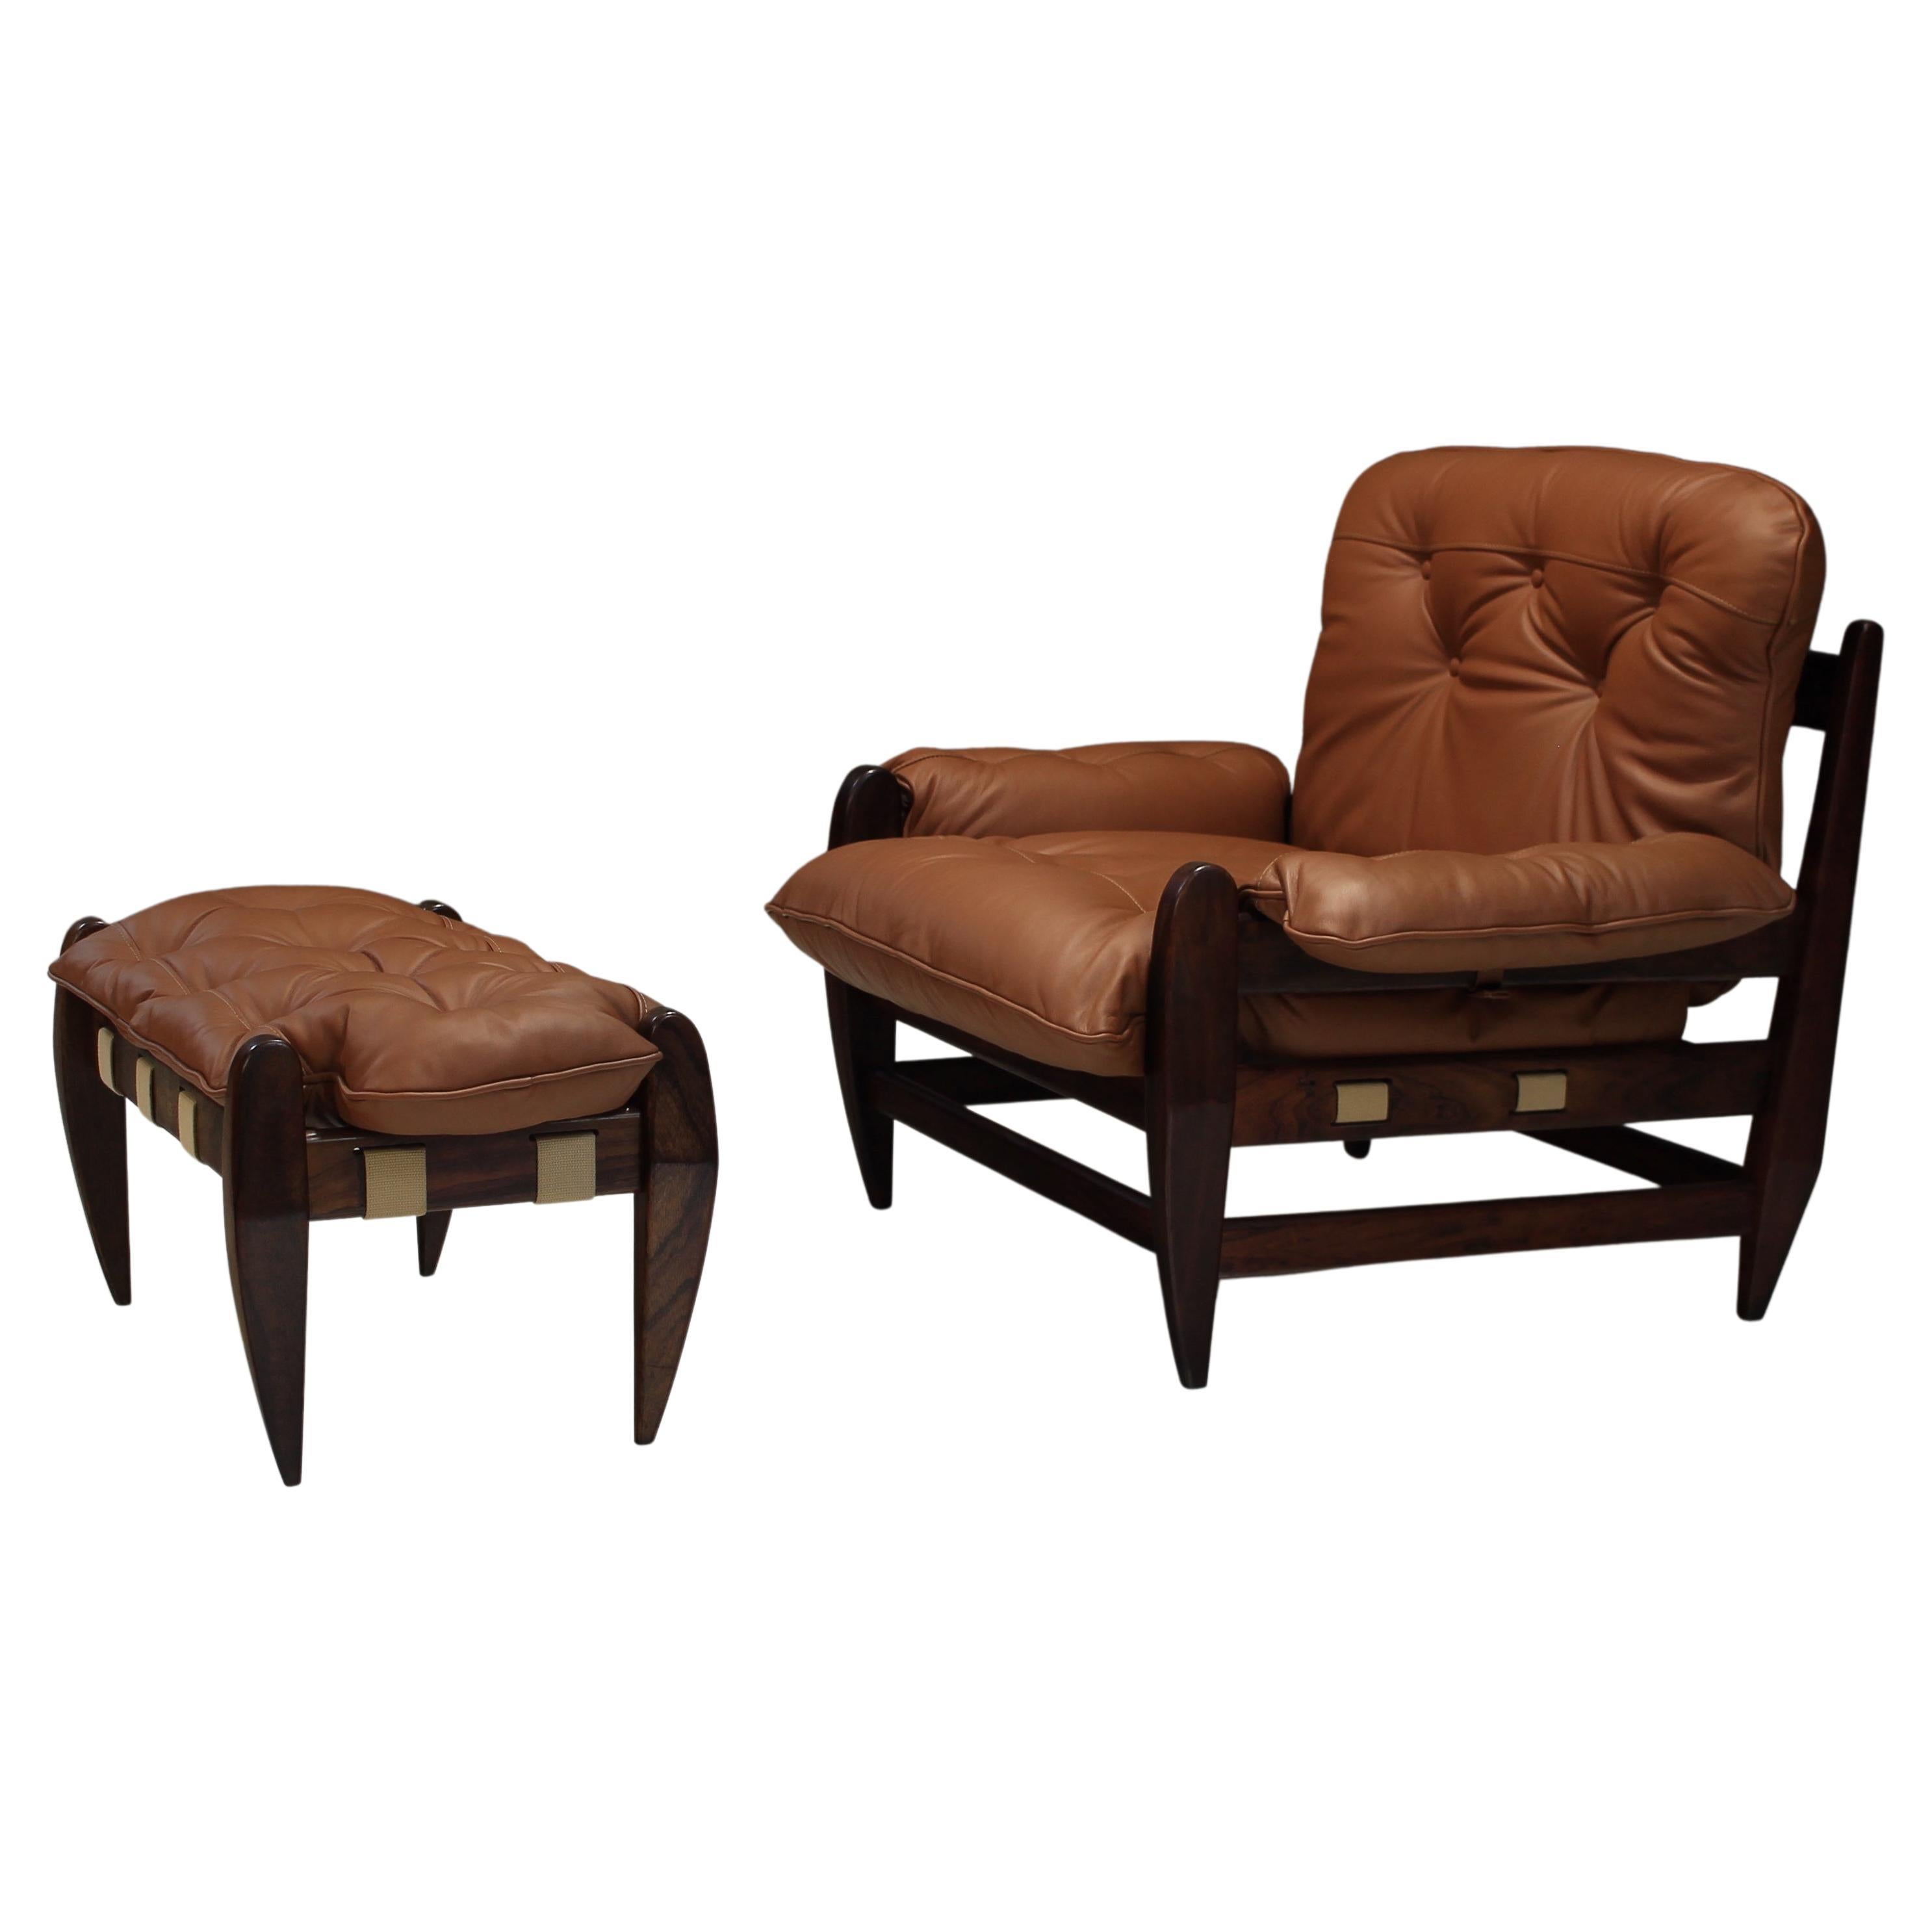 Mid-20th Century 'Rodeio' Chair and Ottoman by Jean Gillon